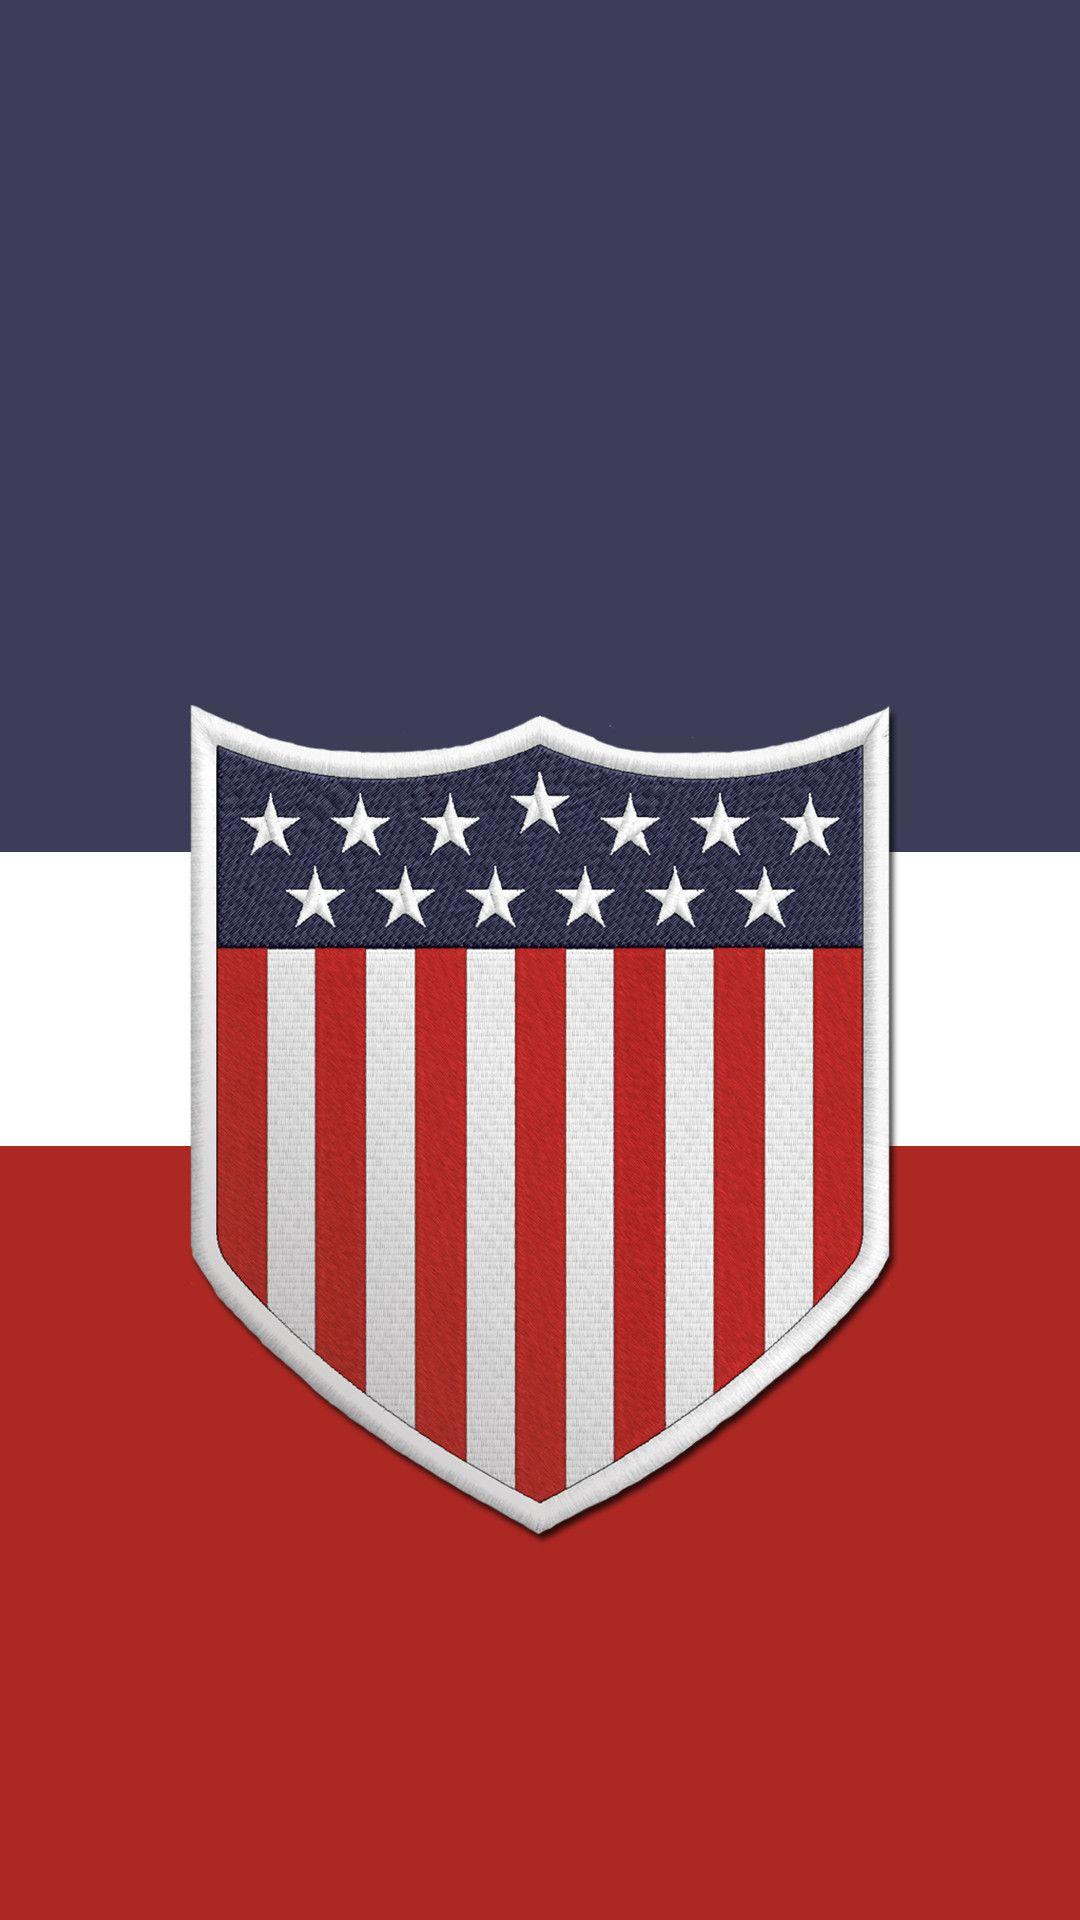 Image For > Us Soccer Wallpapers Iphone